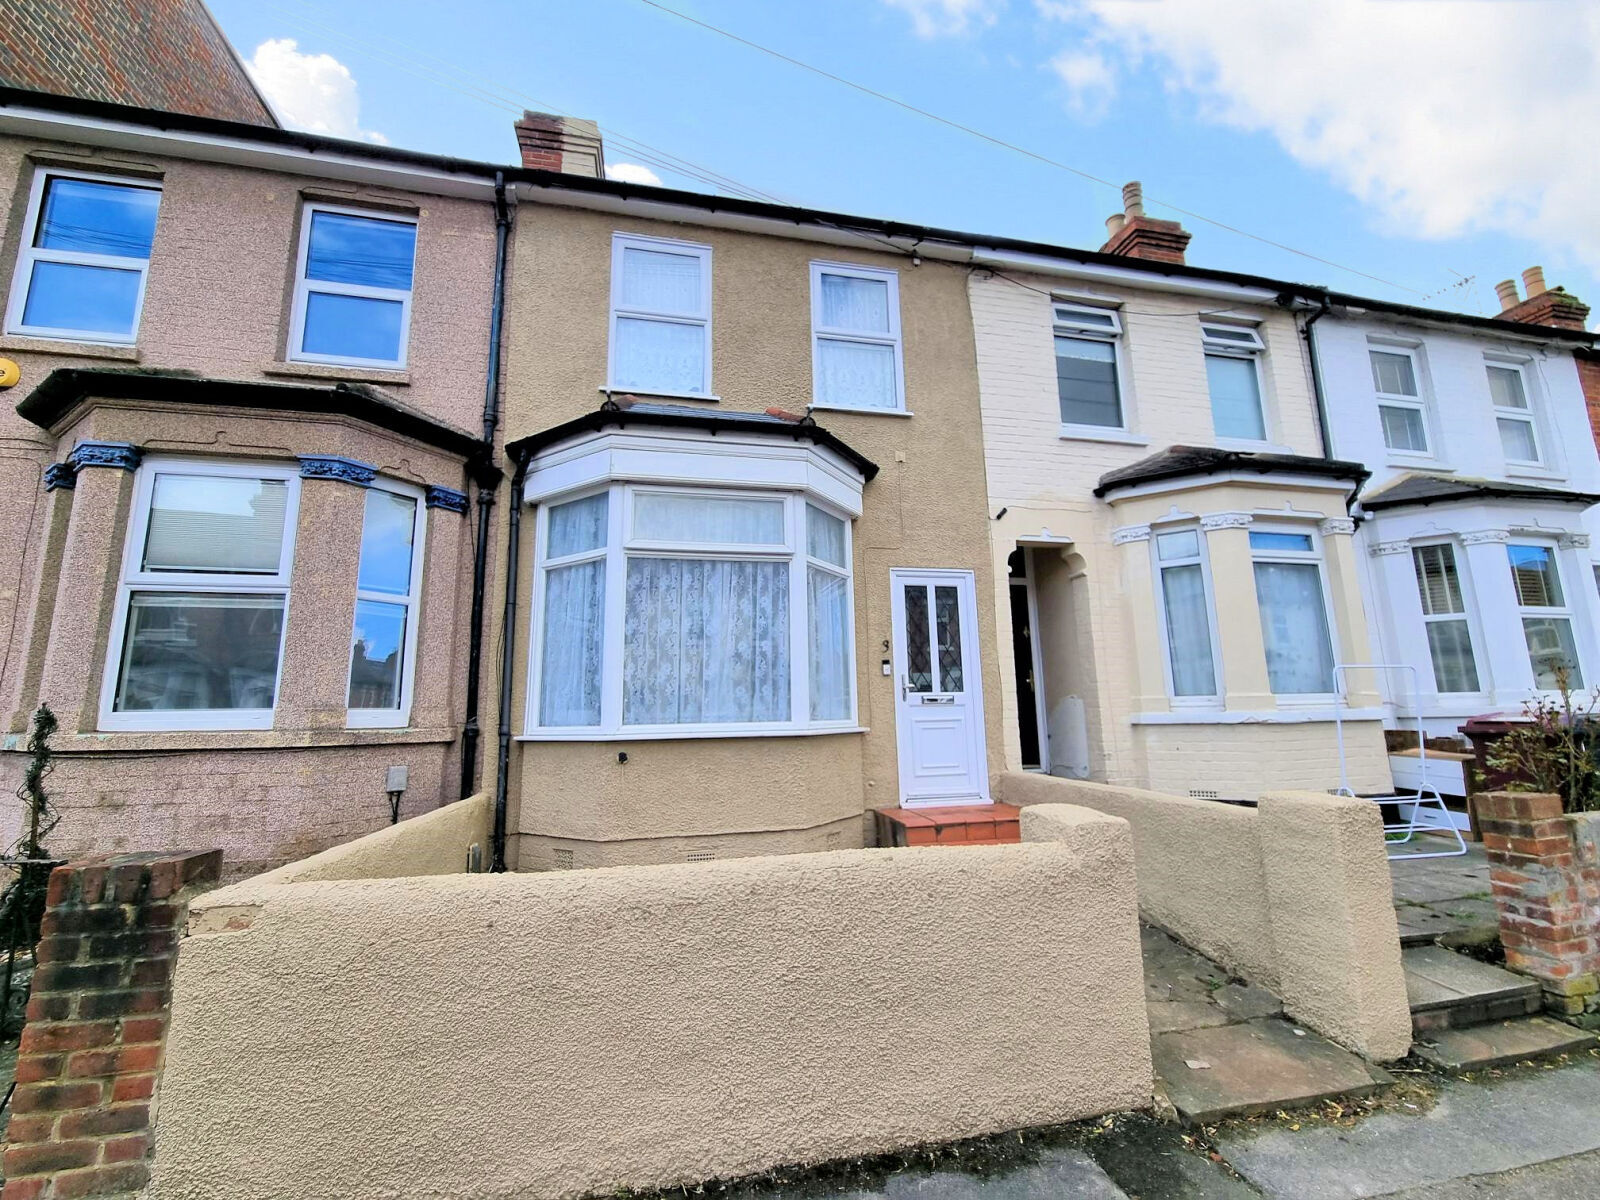 3 bedroom mid terraced house for sale Newport Road, Reading, RG1, main image